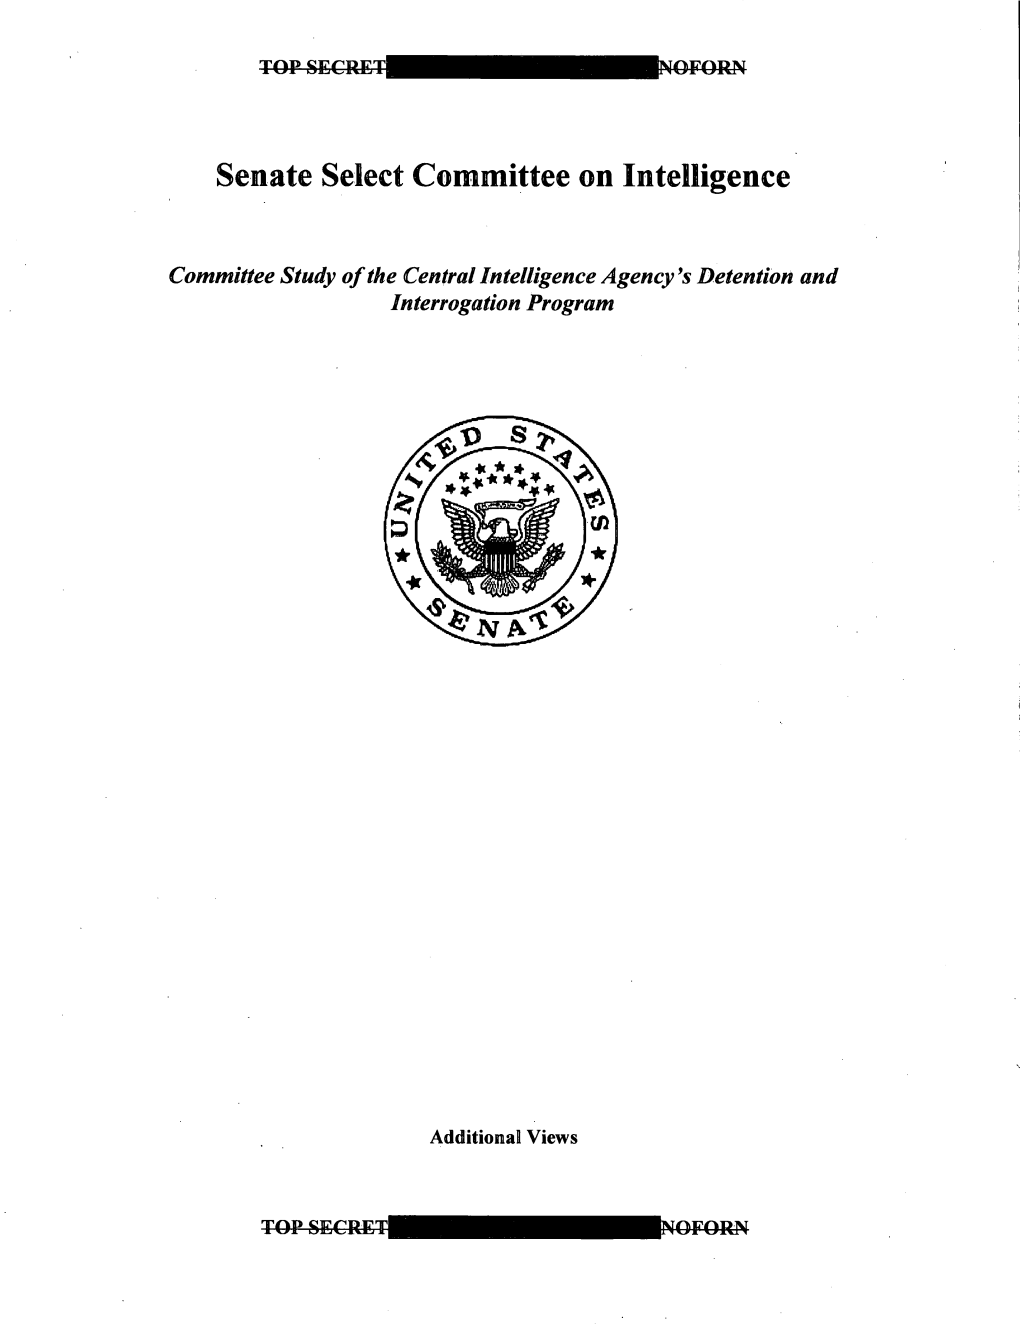 Committee Study Ofthe Central Intelligence Agency's Detention and Interrogation Program